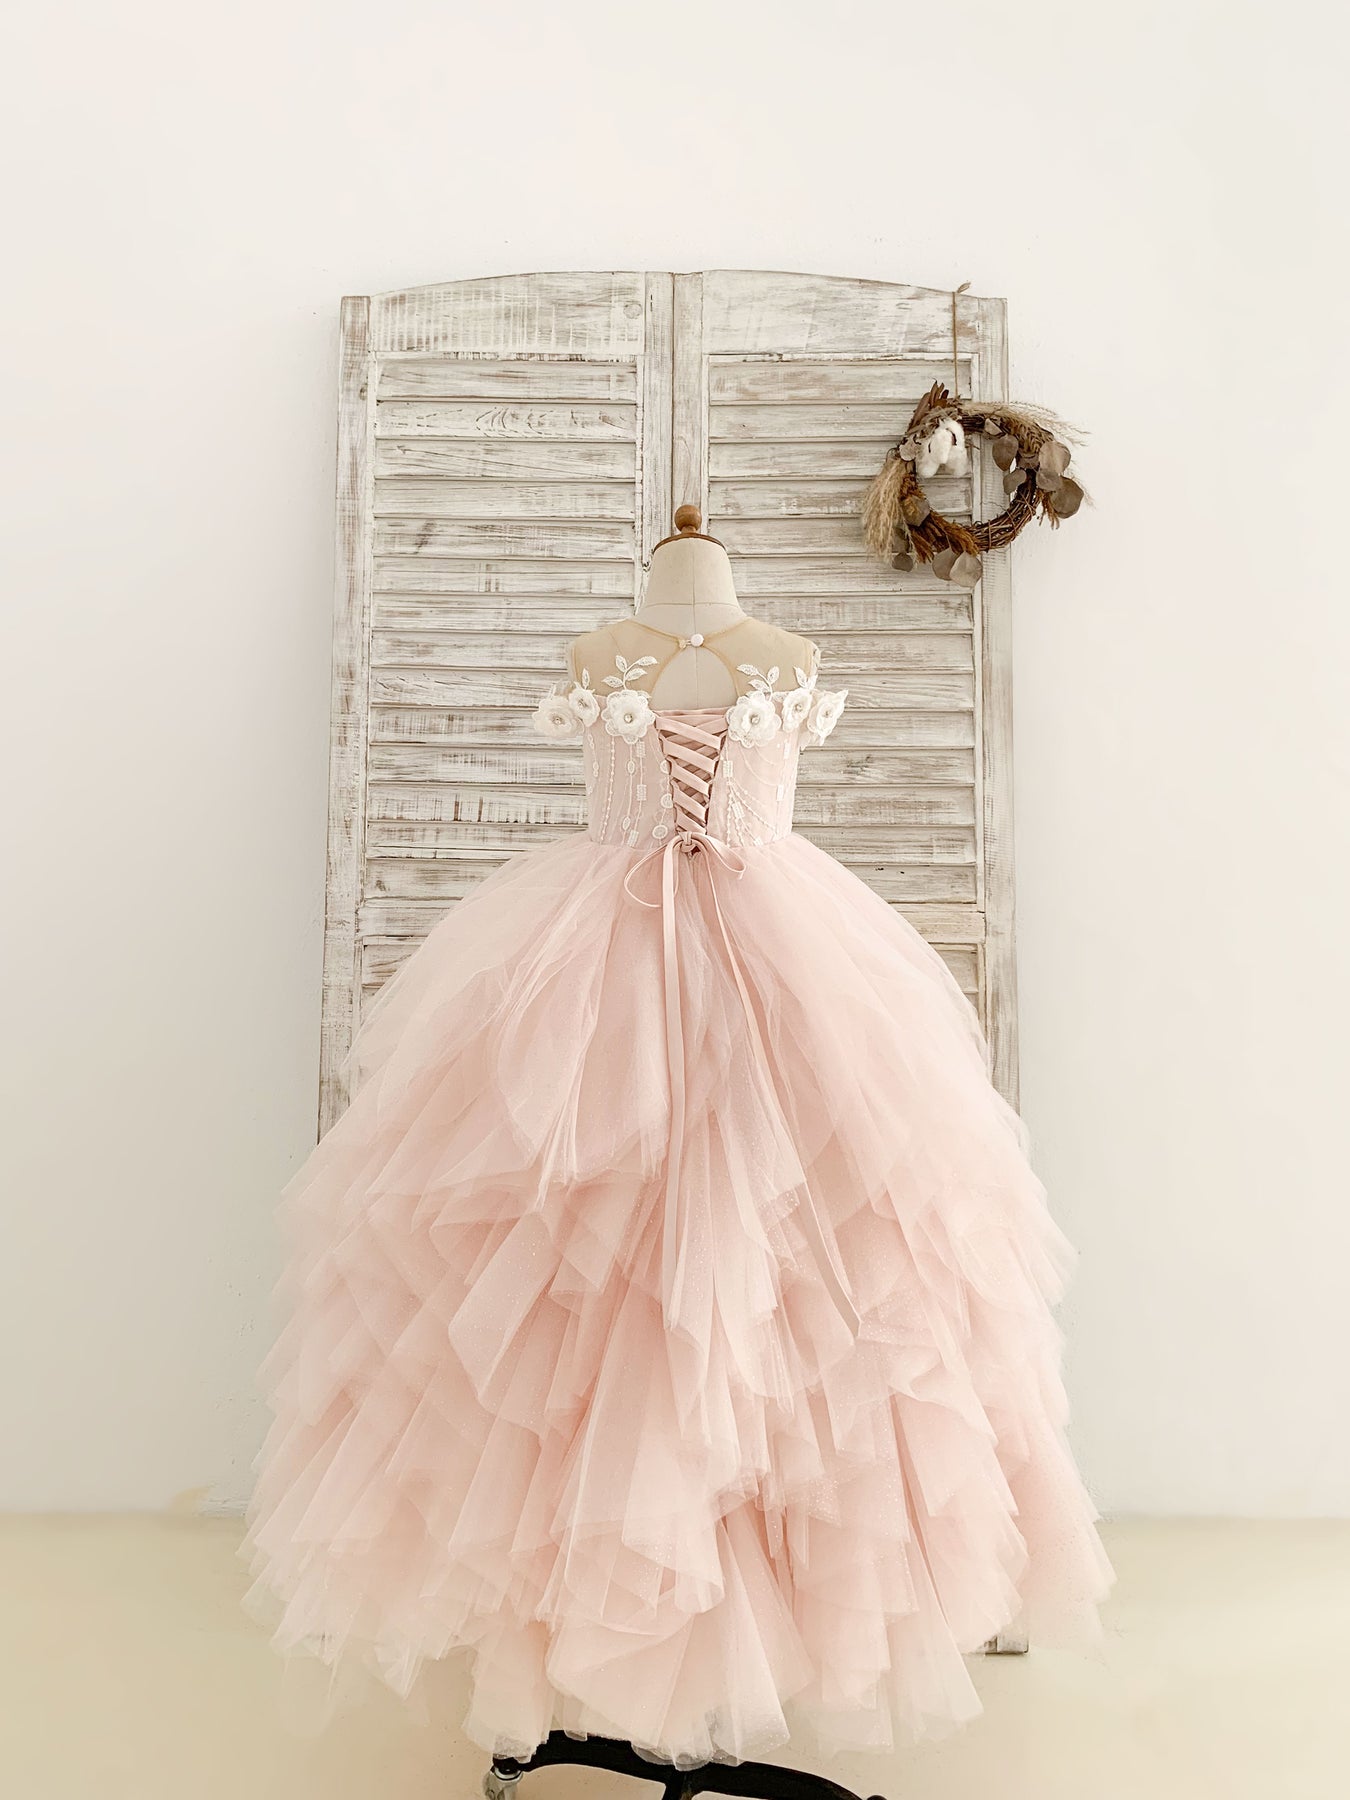 Festive Gown Dress for Girls| Sequin Bow Fancy Wedding Dress for Girls |  Princess Gown